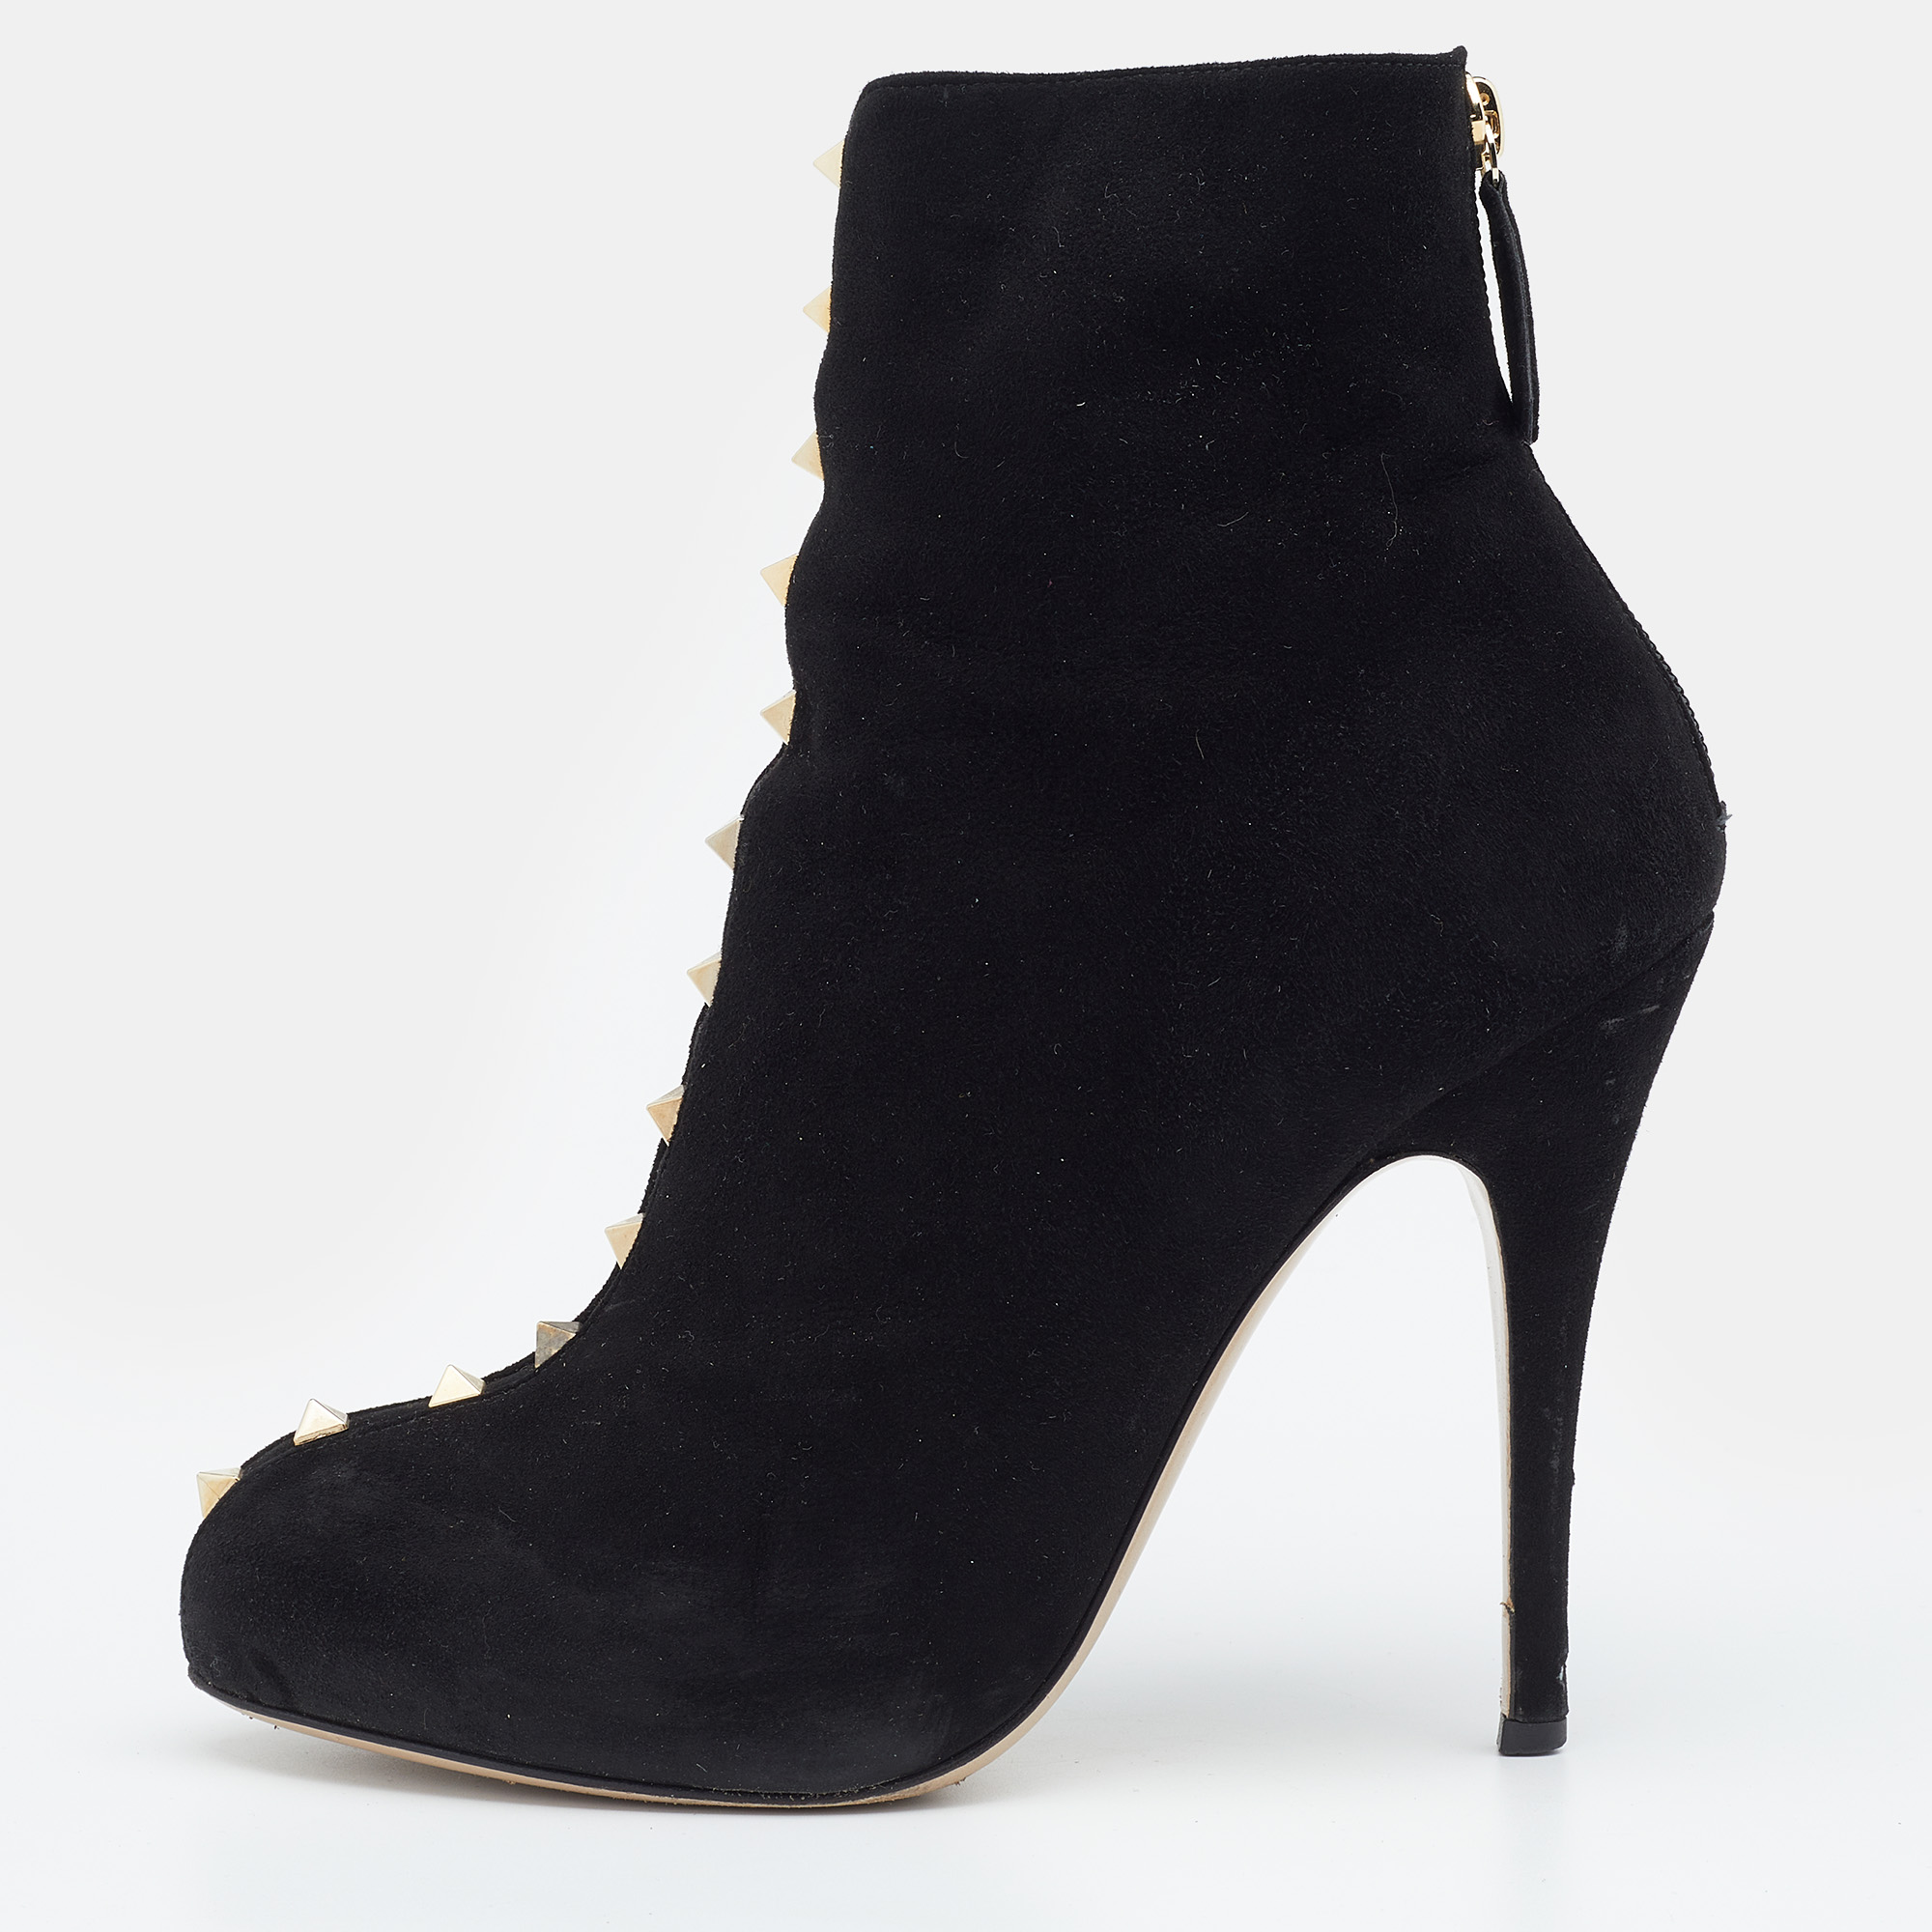 Valentino Black Suede Rockstud Ankle Length Boots Size 38